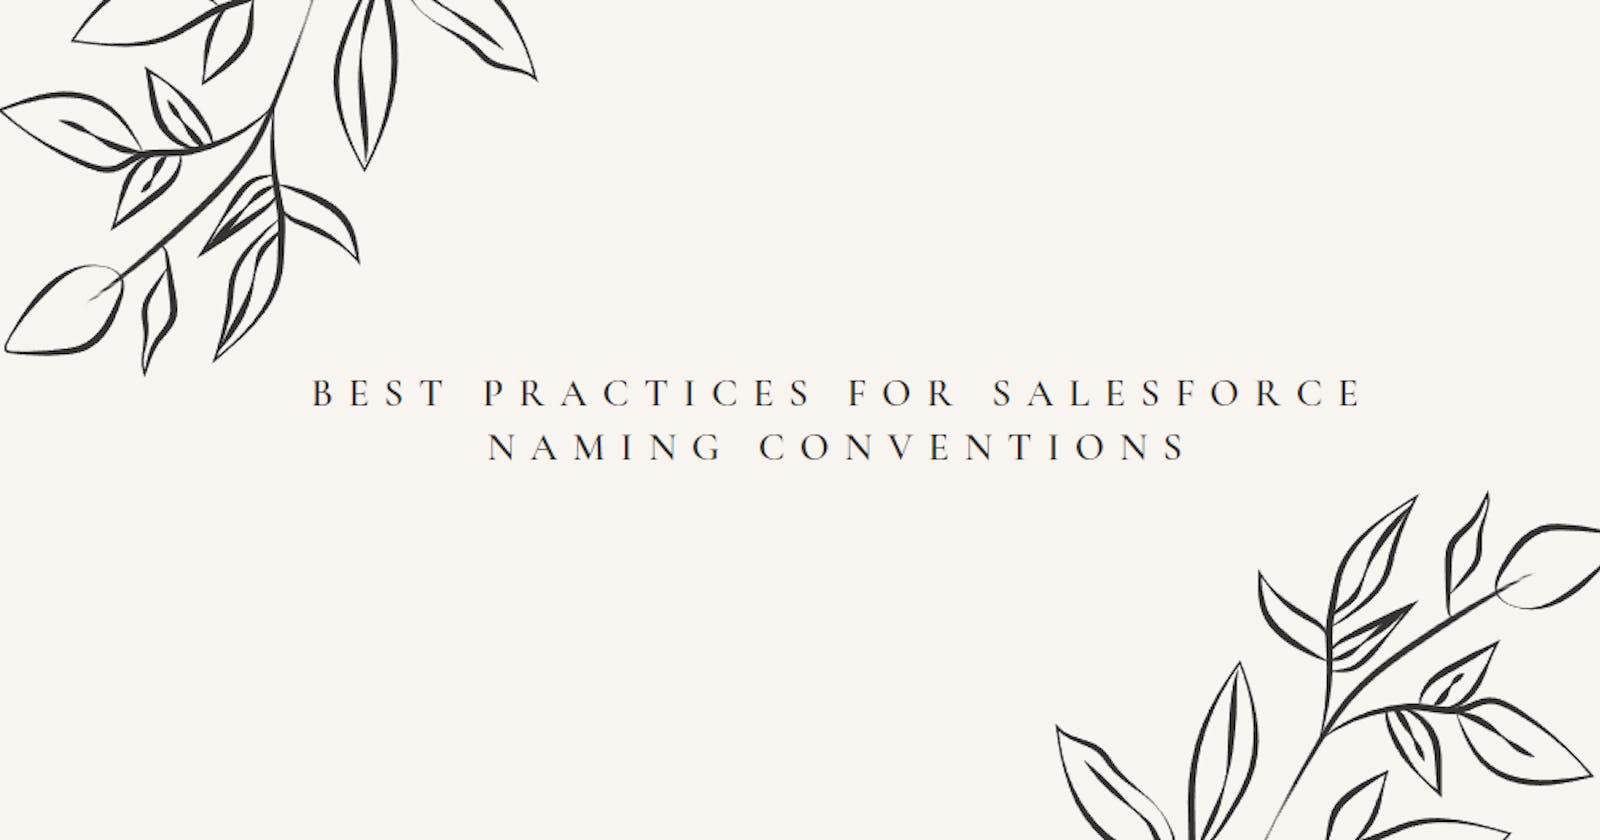 Best Practices for Salesforce Naming Conventions